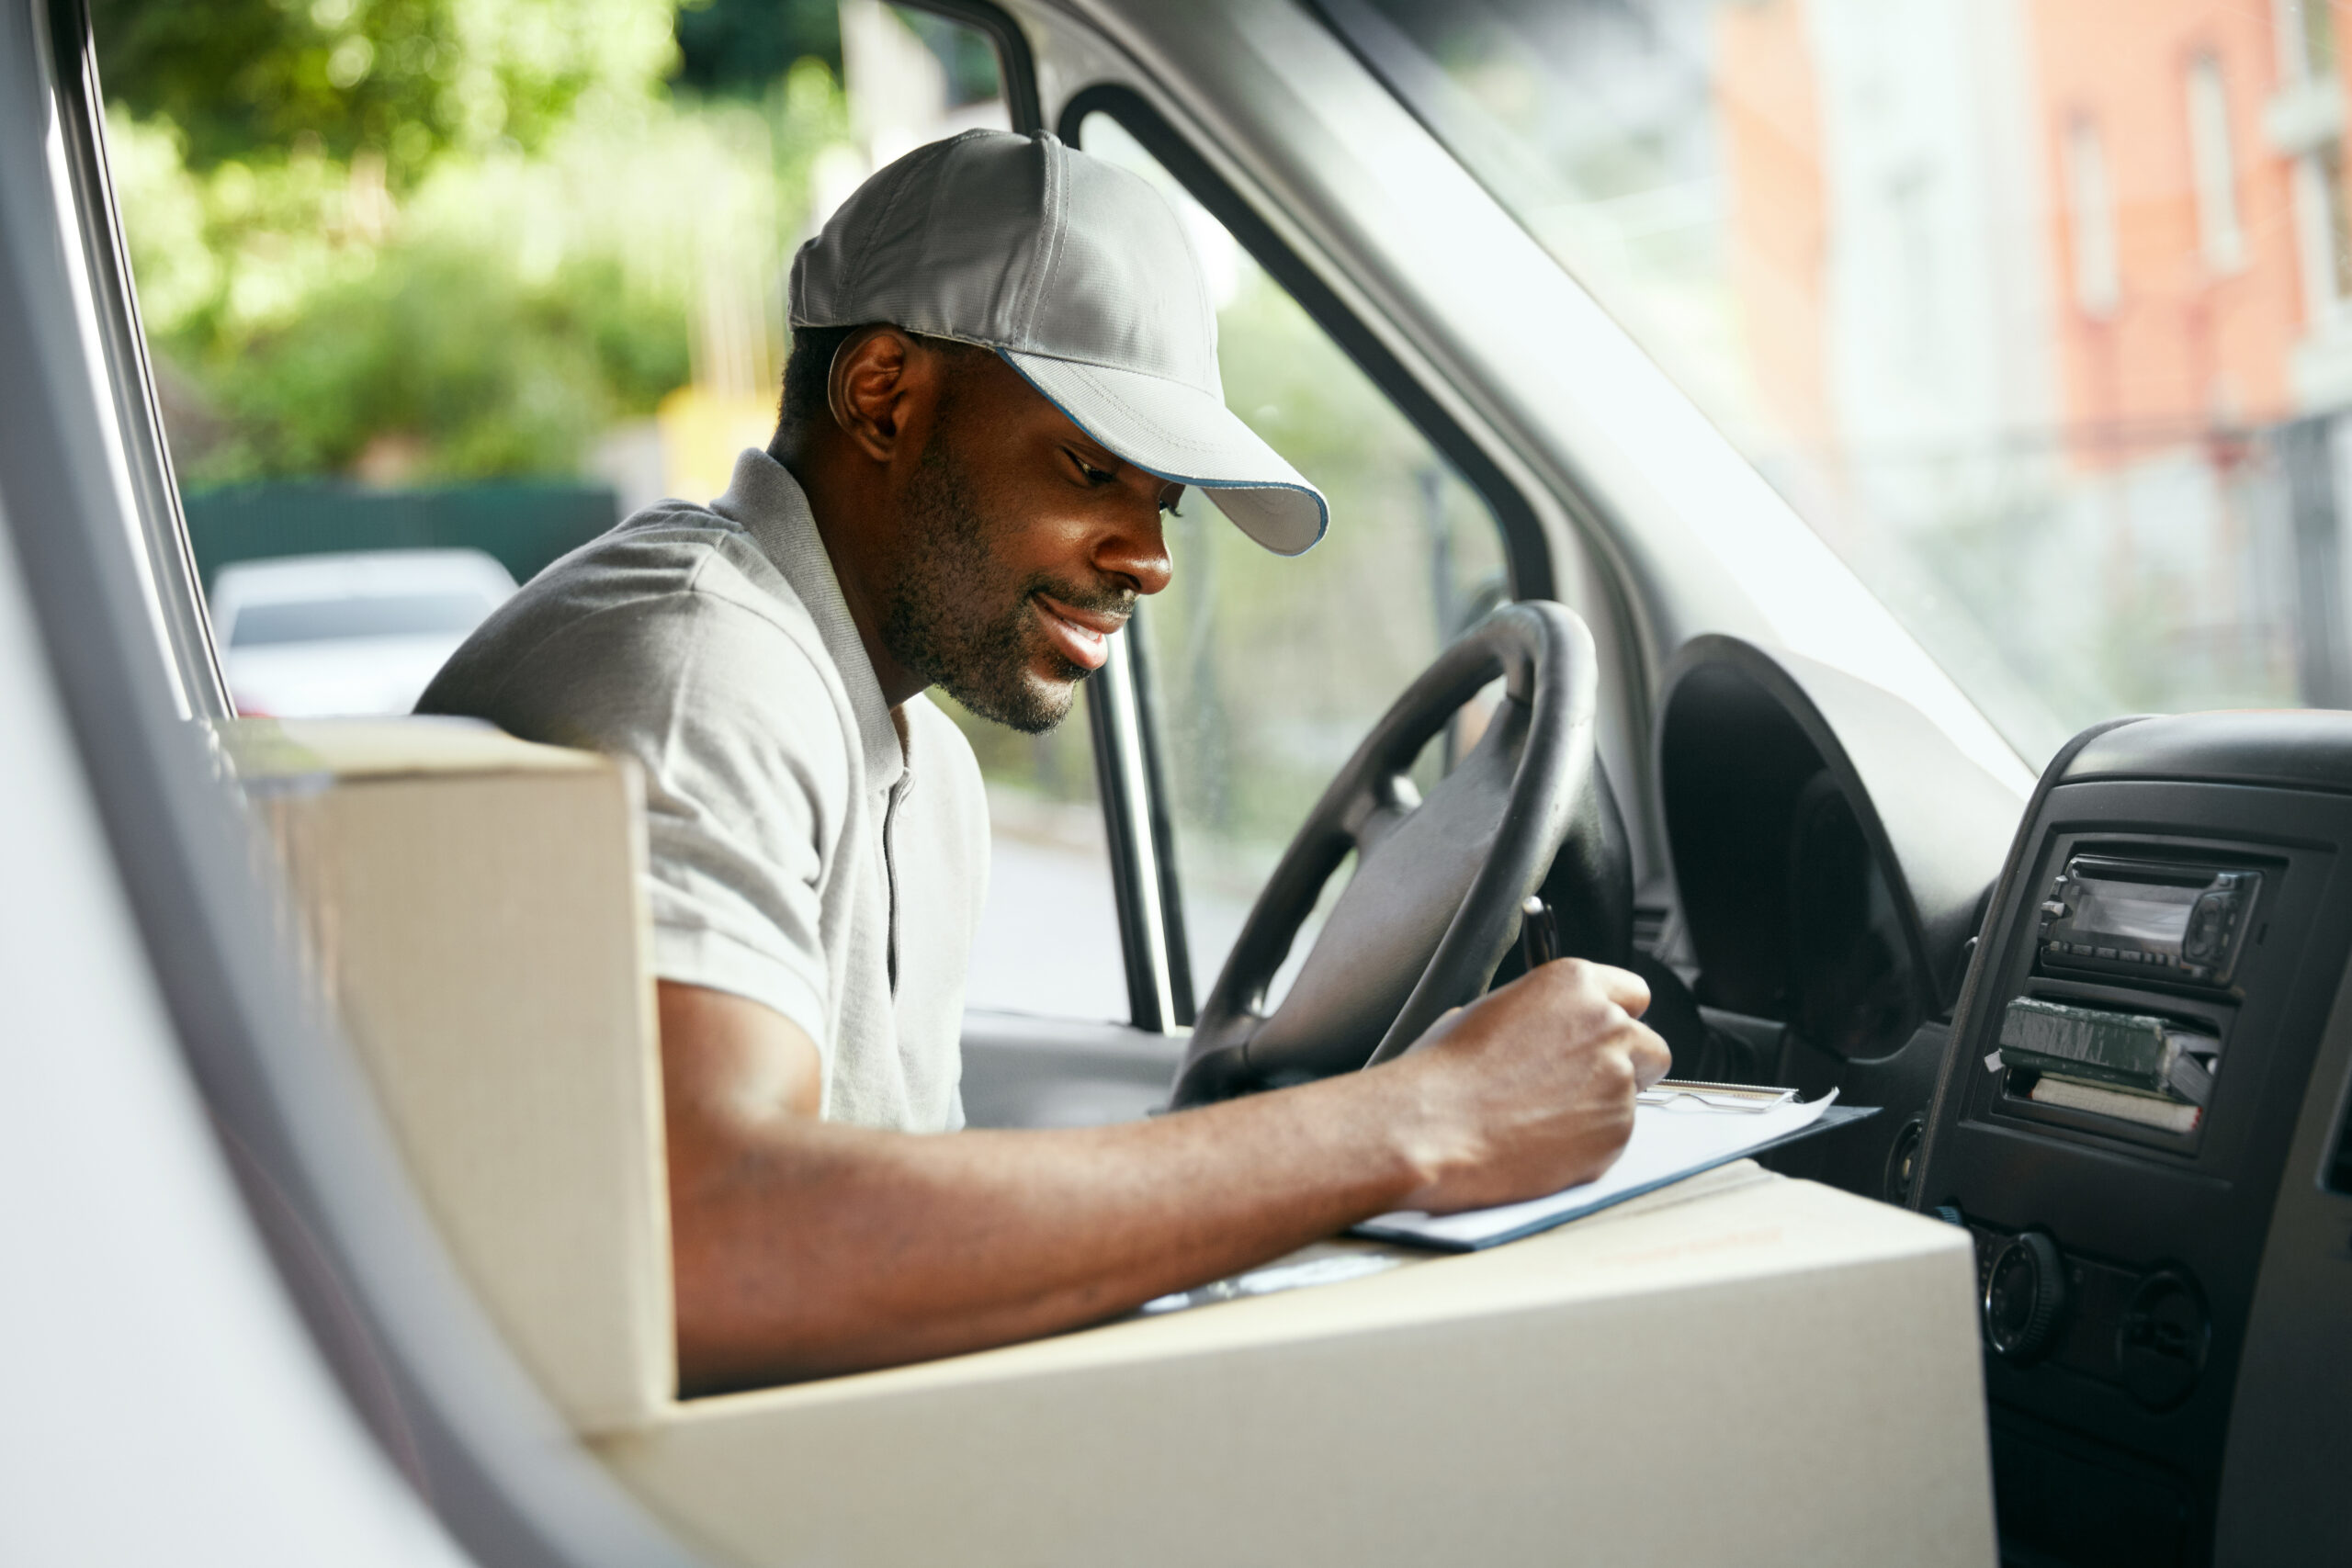 Man smiling in the van while writing on a piece of paper